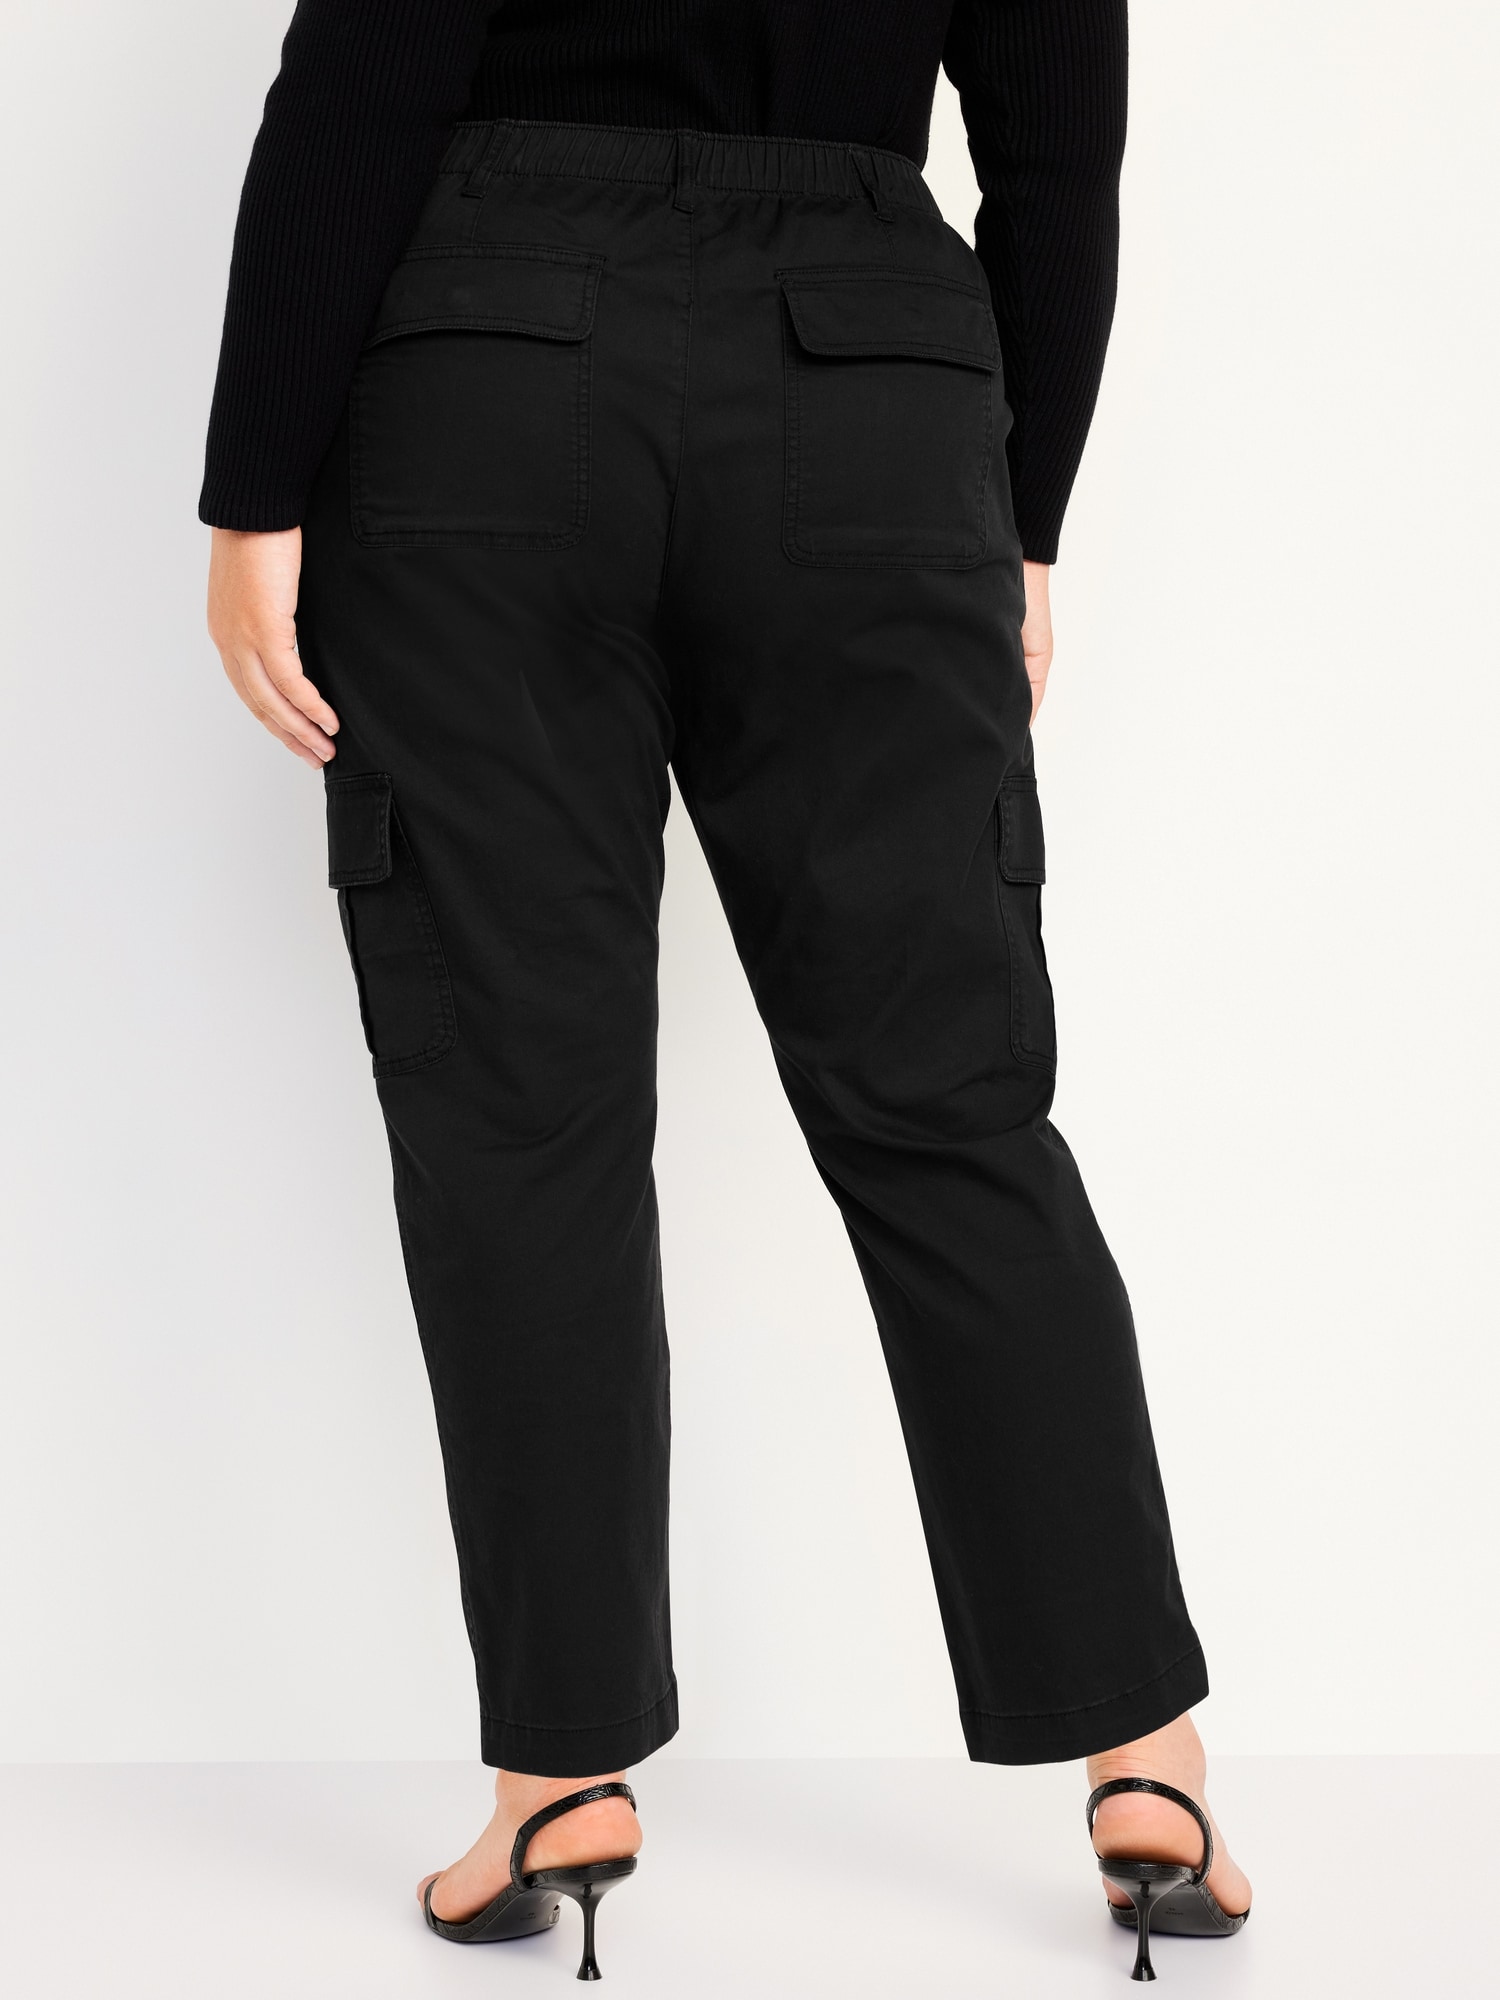 High-Waisted OGC Chino Cargo Pants for Women | Old Navy